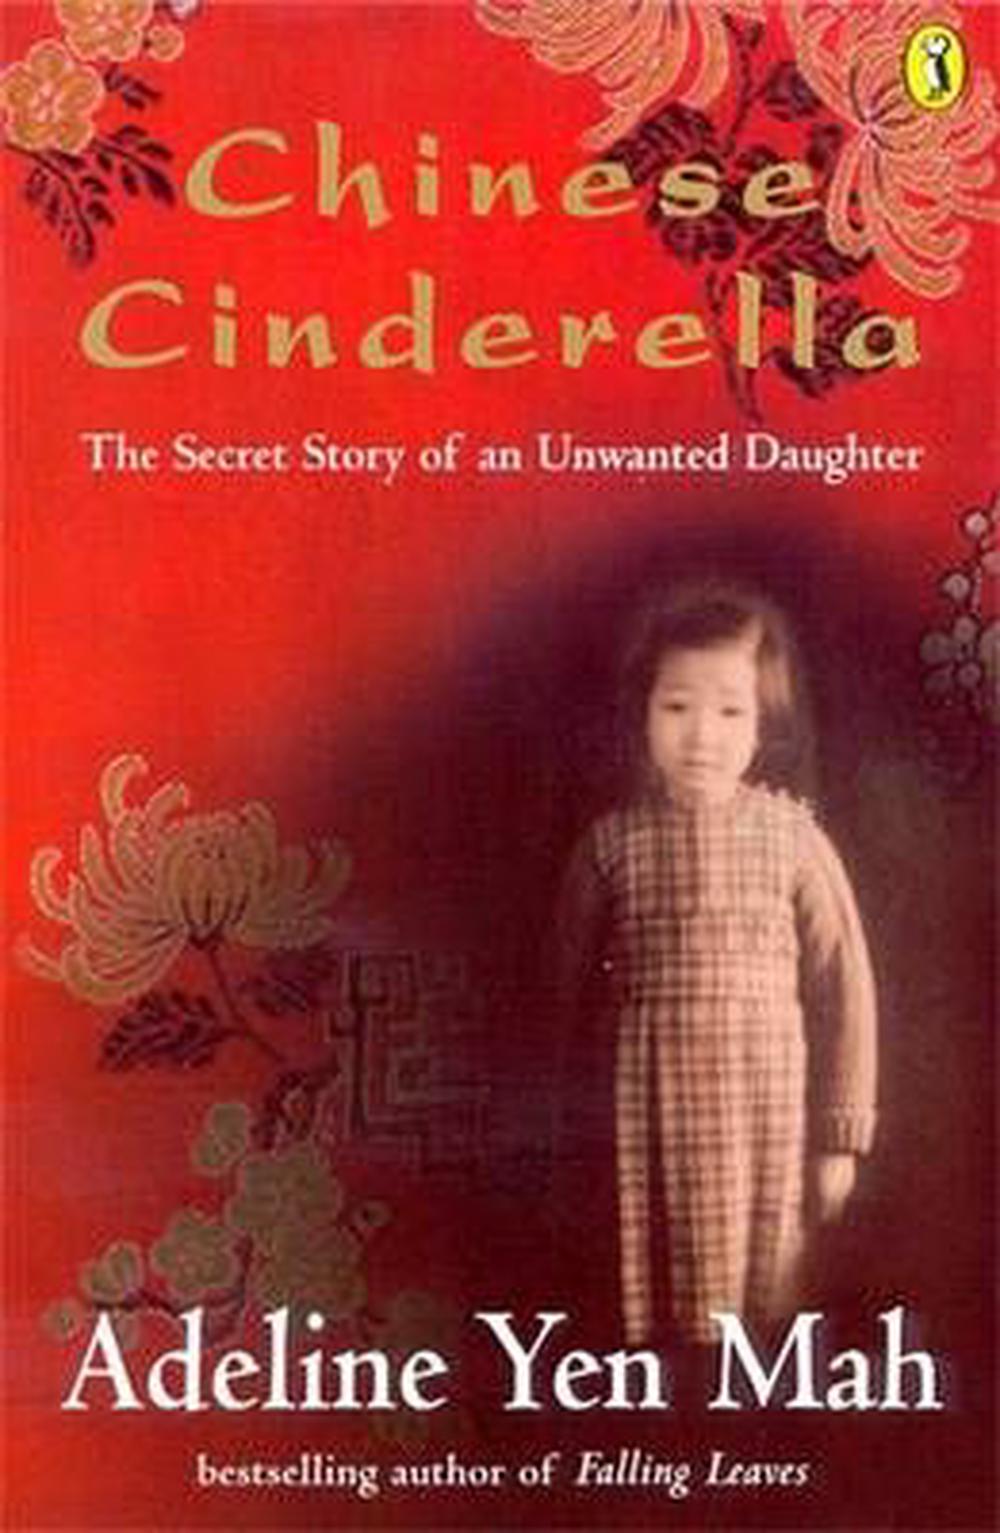 book review for chinese cinderella